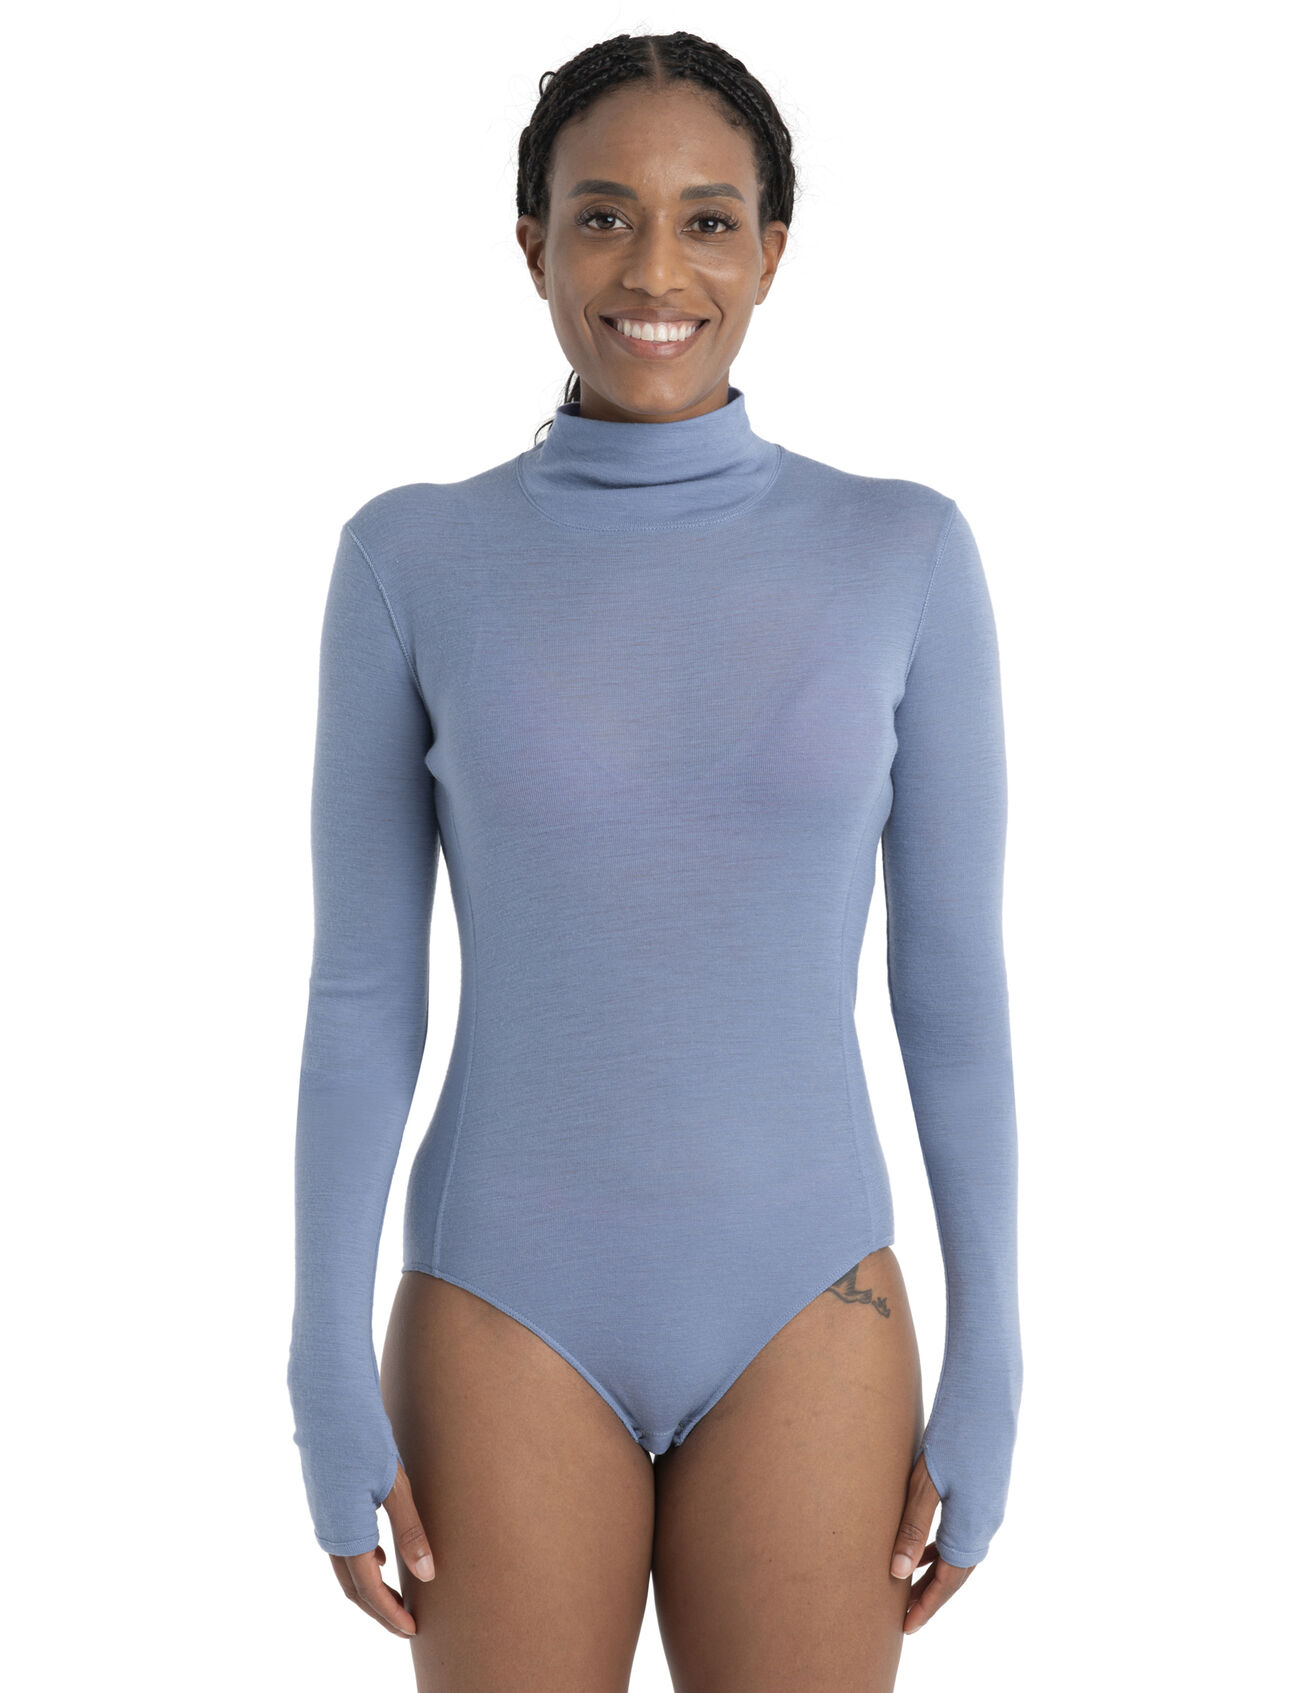 Petites Bodysuits for Women for sale